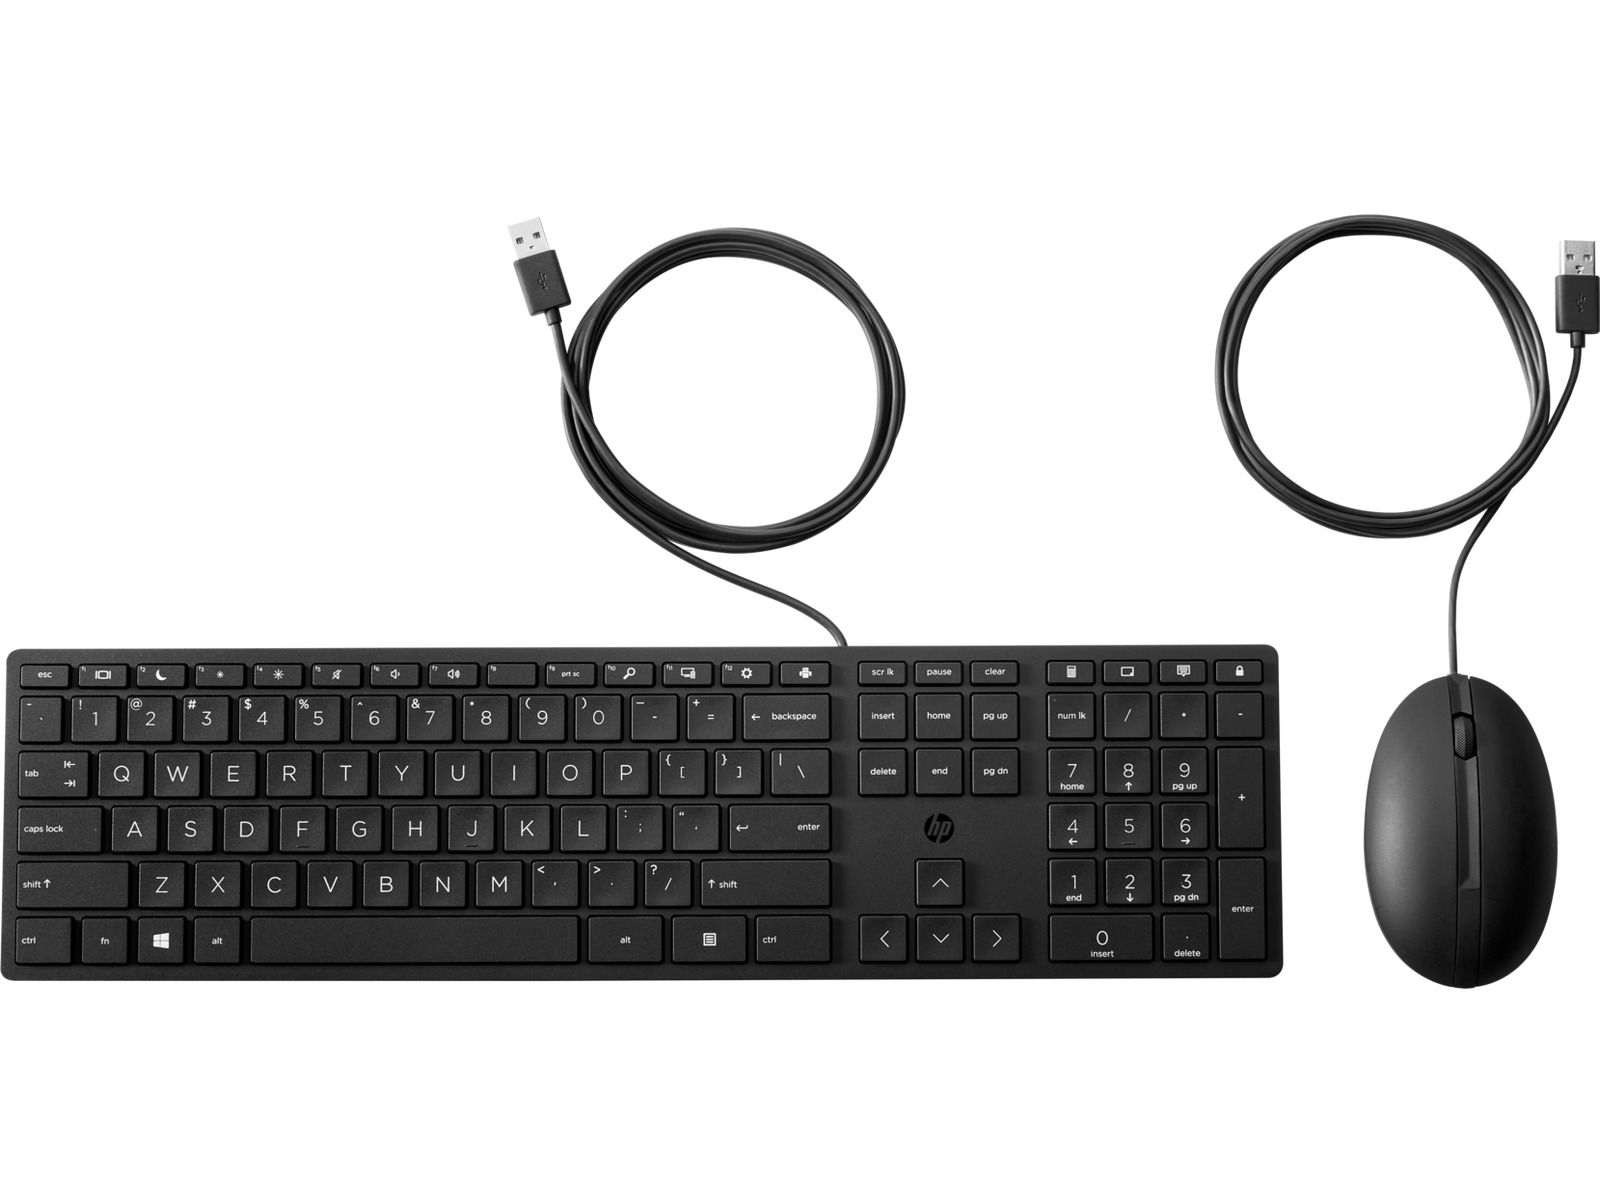 HP Wired Desktop 320MK Mouse and Keyboard,USB (9SR36UT#ABA)